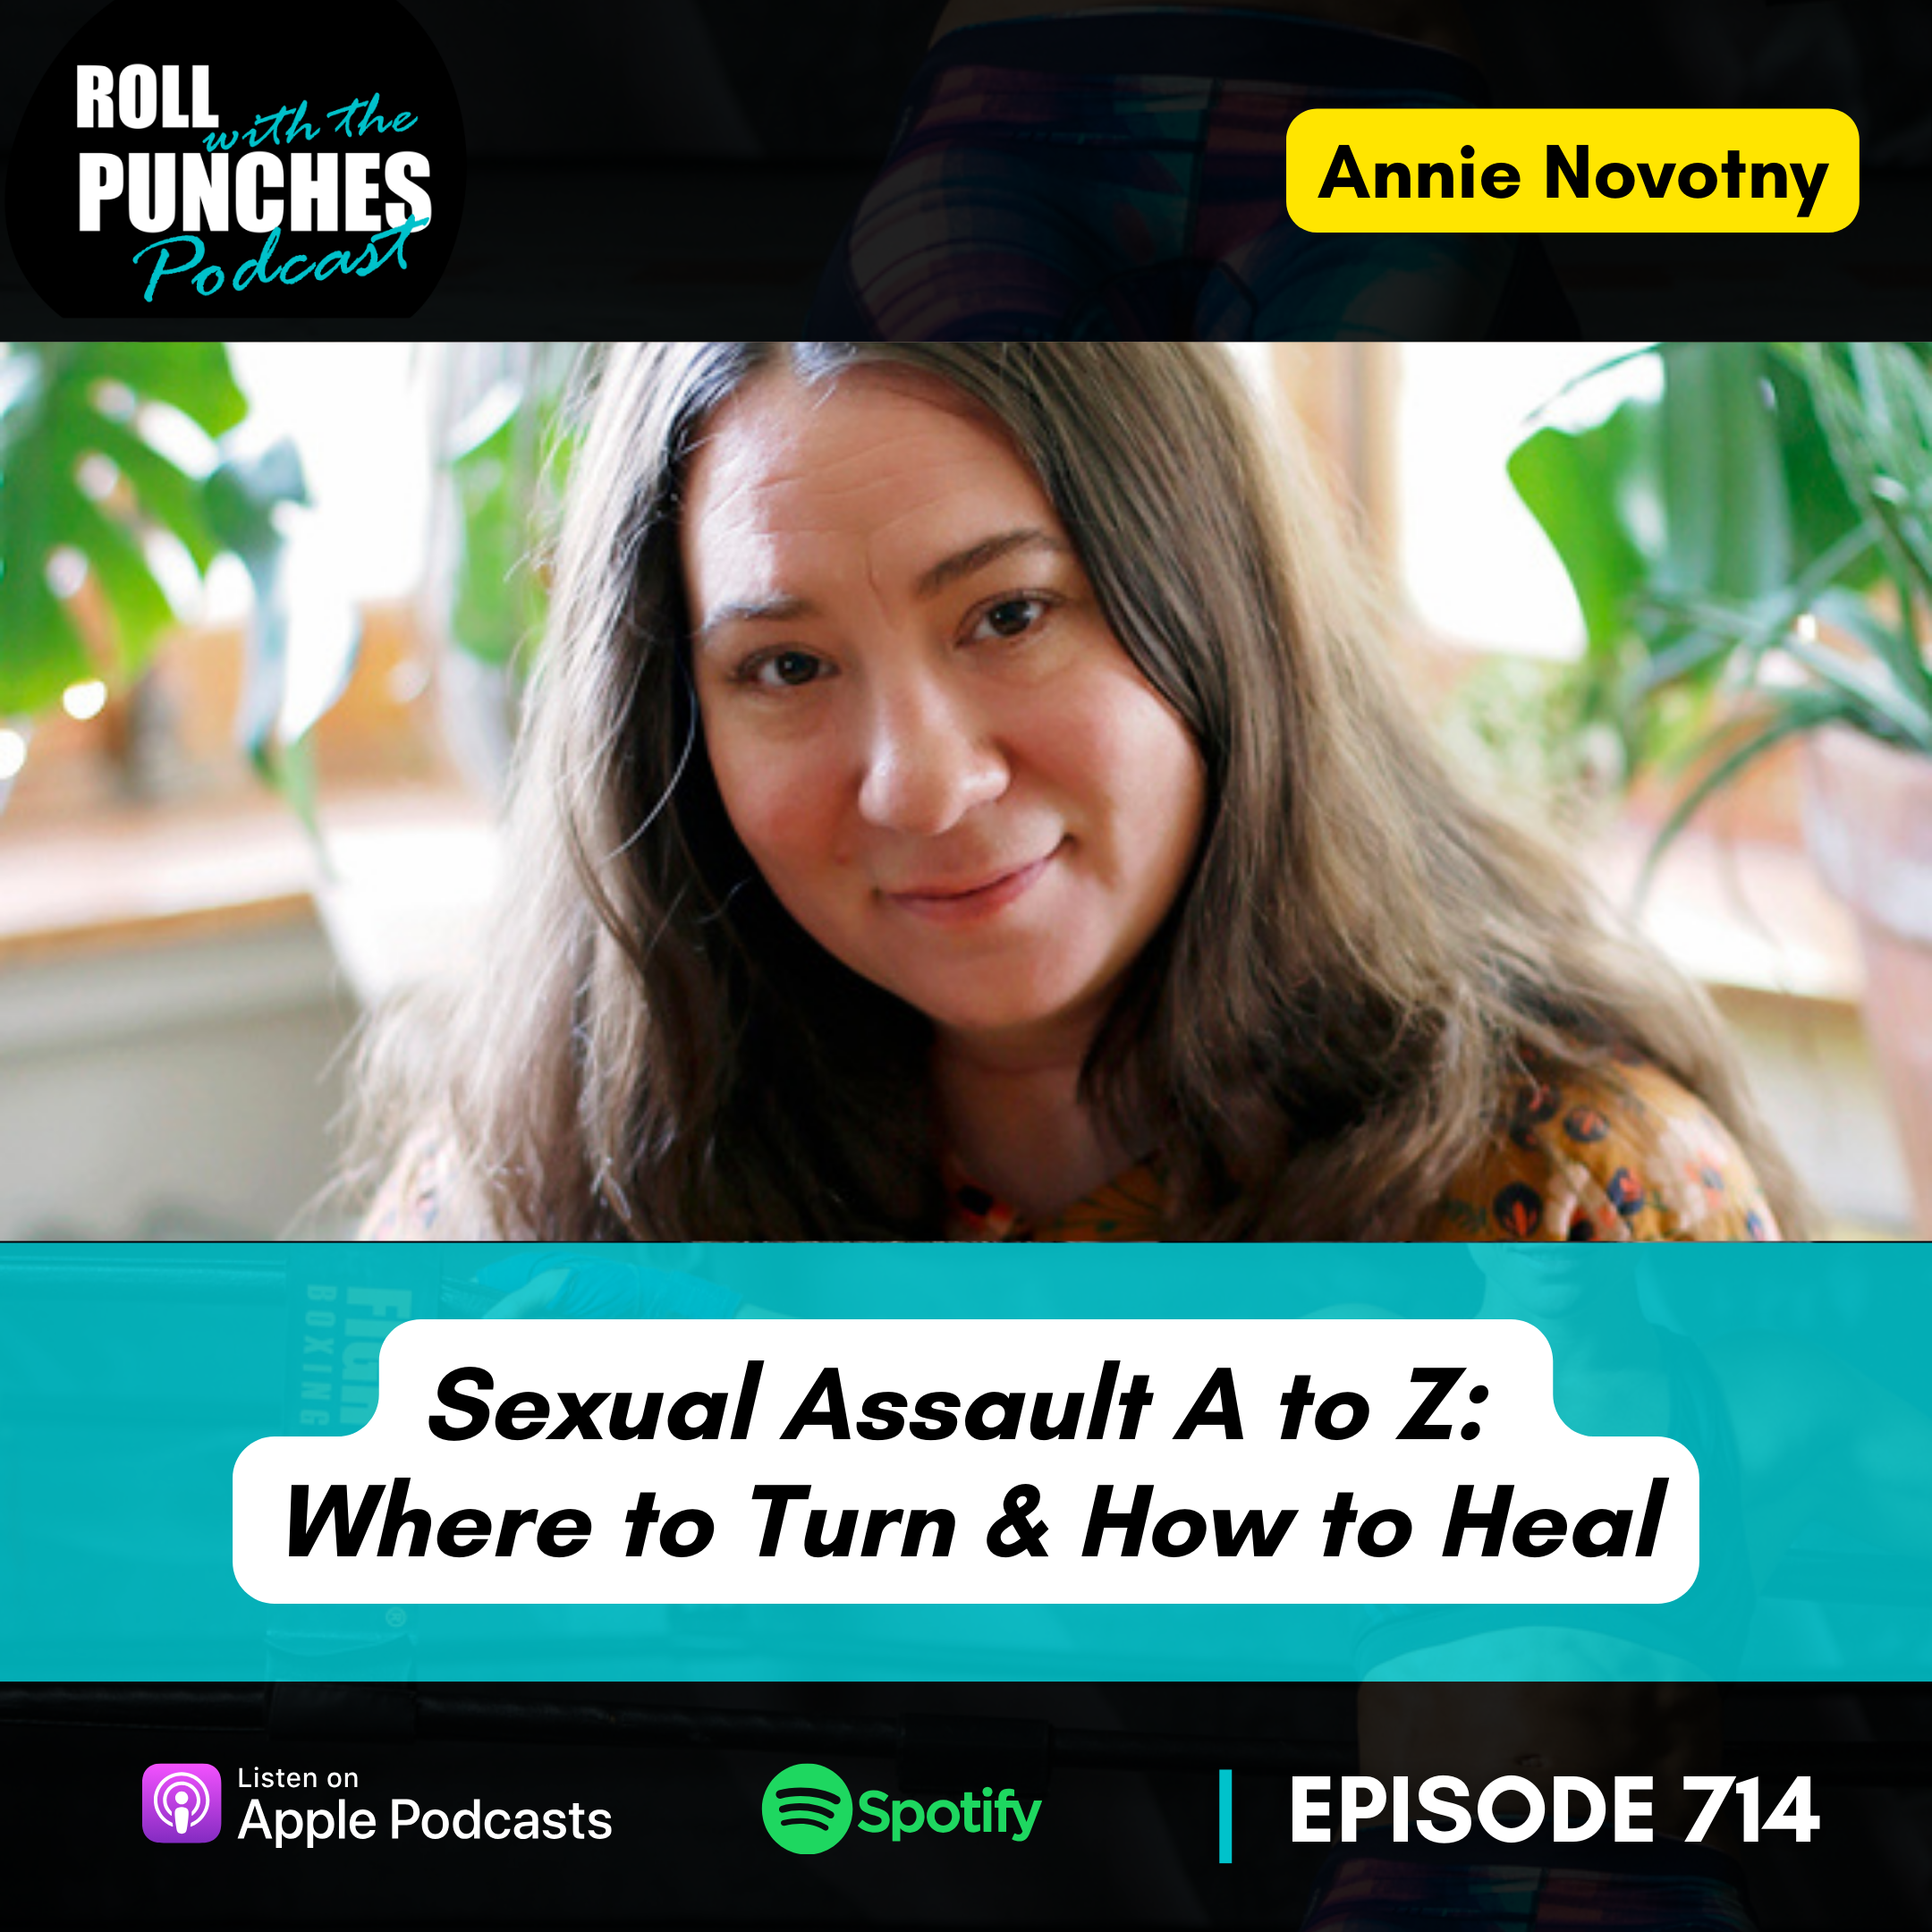 Sexual Assault A to Z: Where to Turn & How to Heal | Annie Novotny - 714